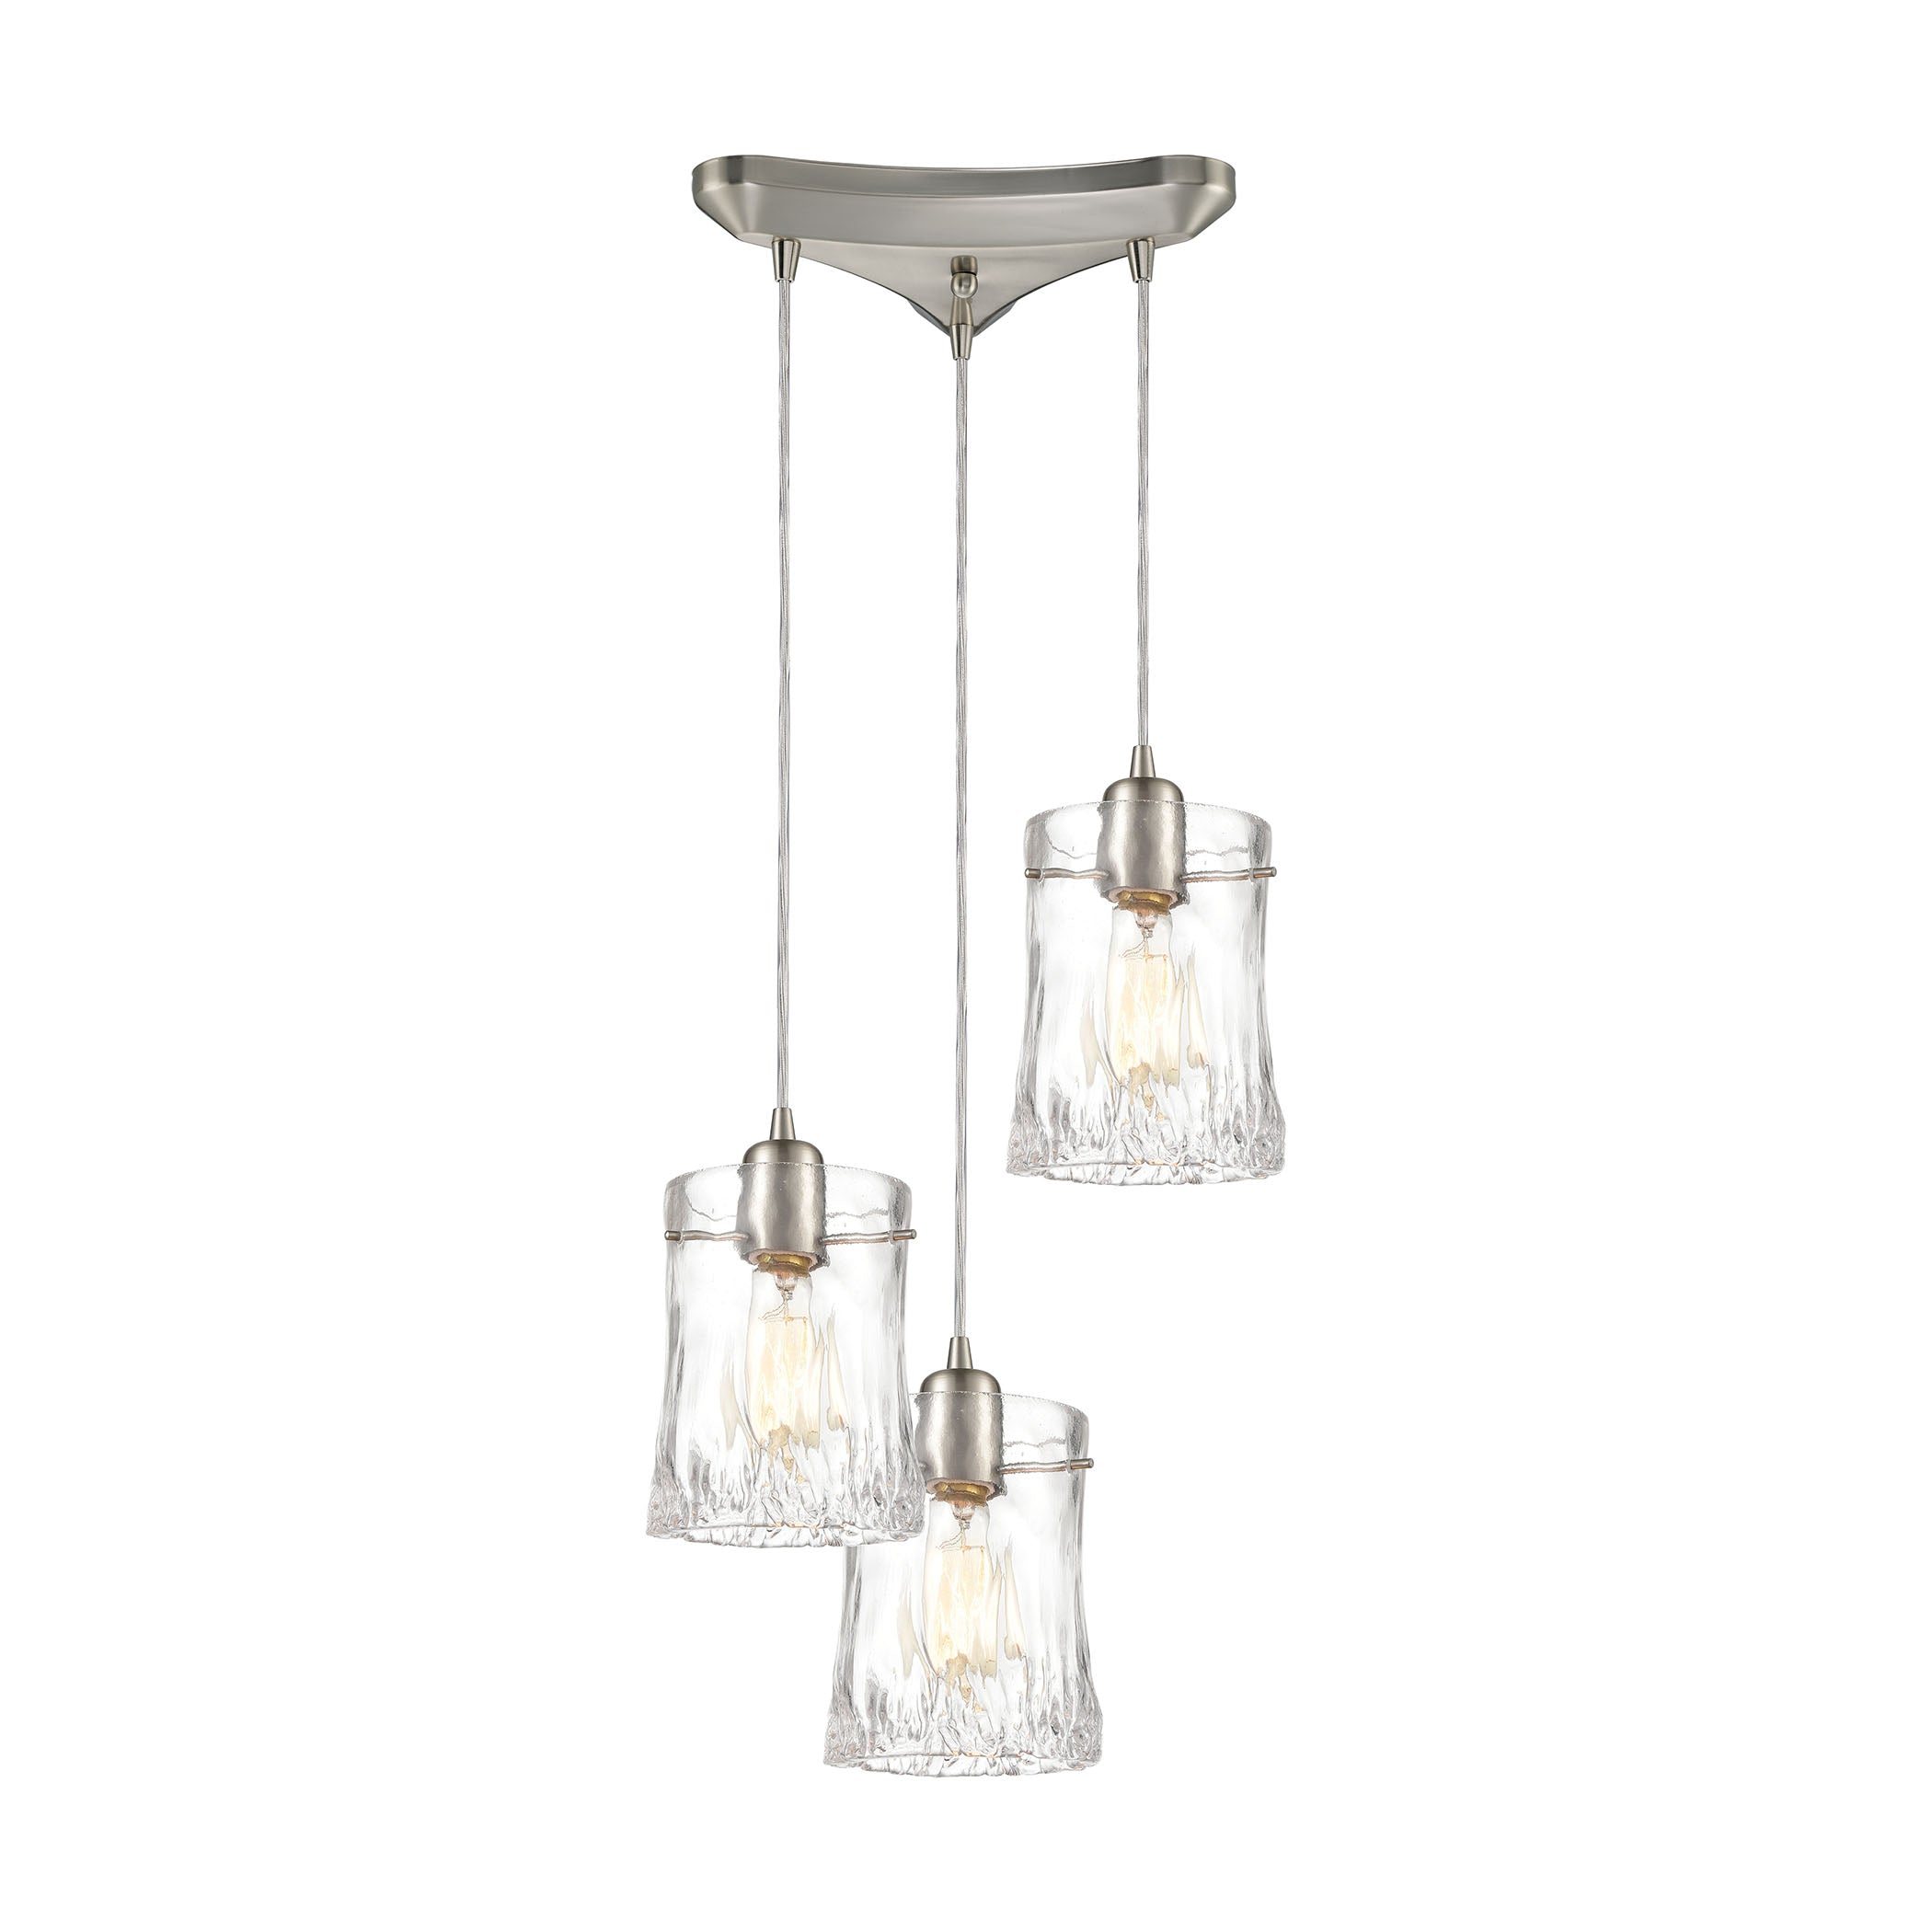 ELK Lighting 21200/3 Hand Formed Glass 3-Light Triangular Mini Pendant Fixture in Satin Nickel with Clear Glass